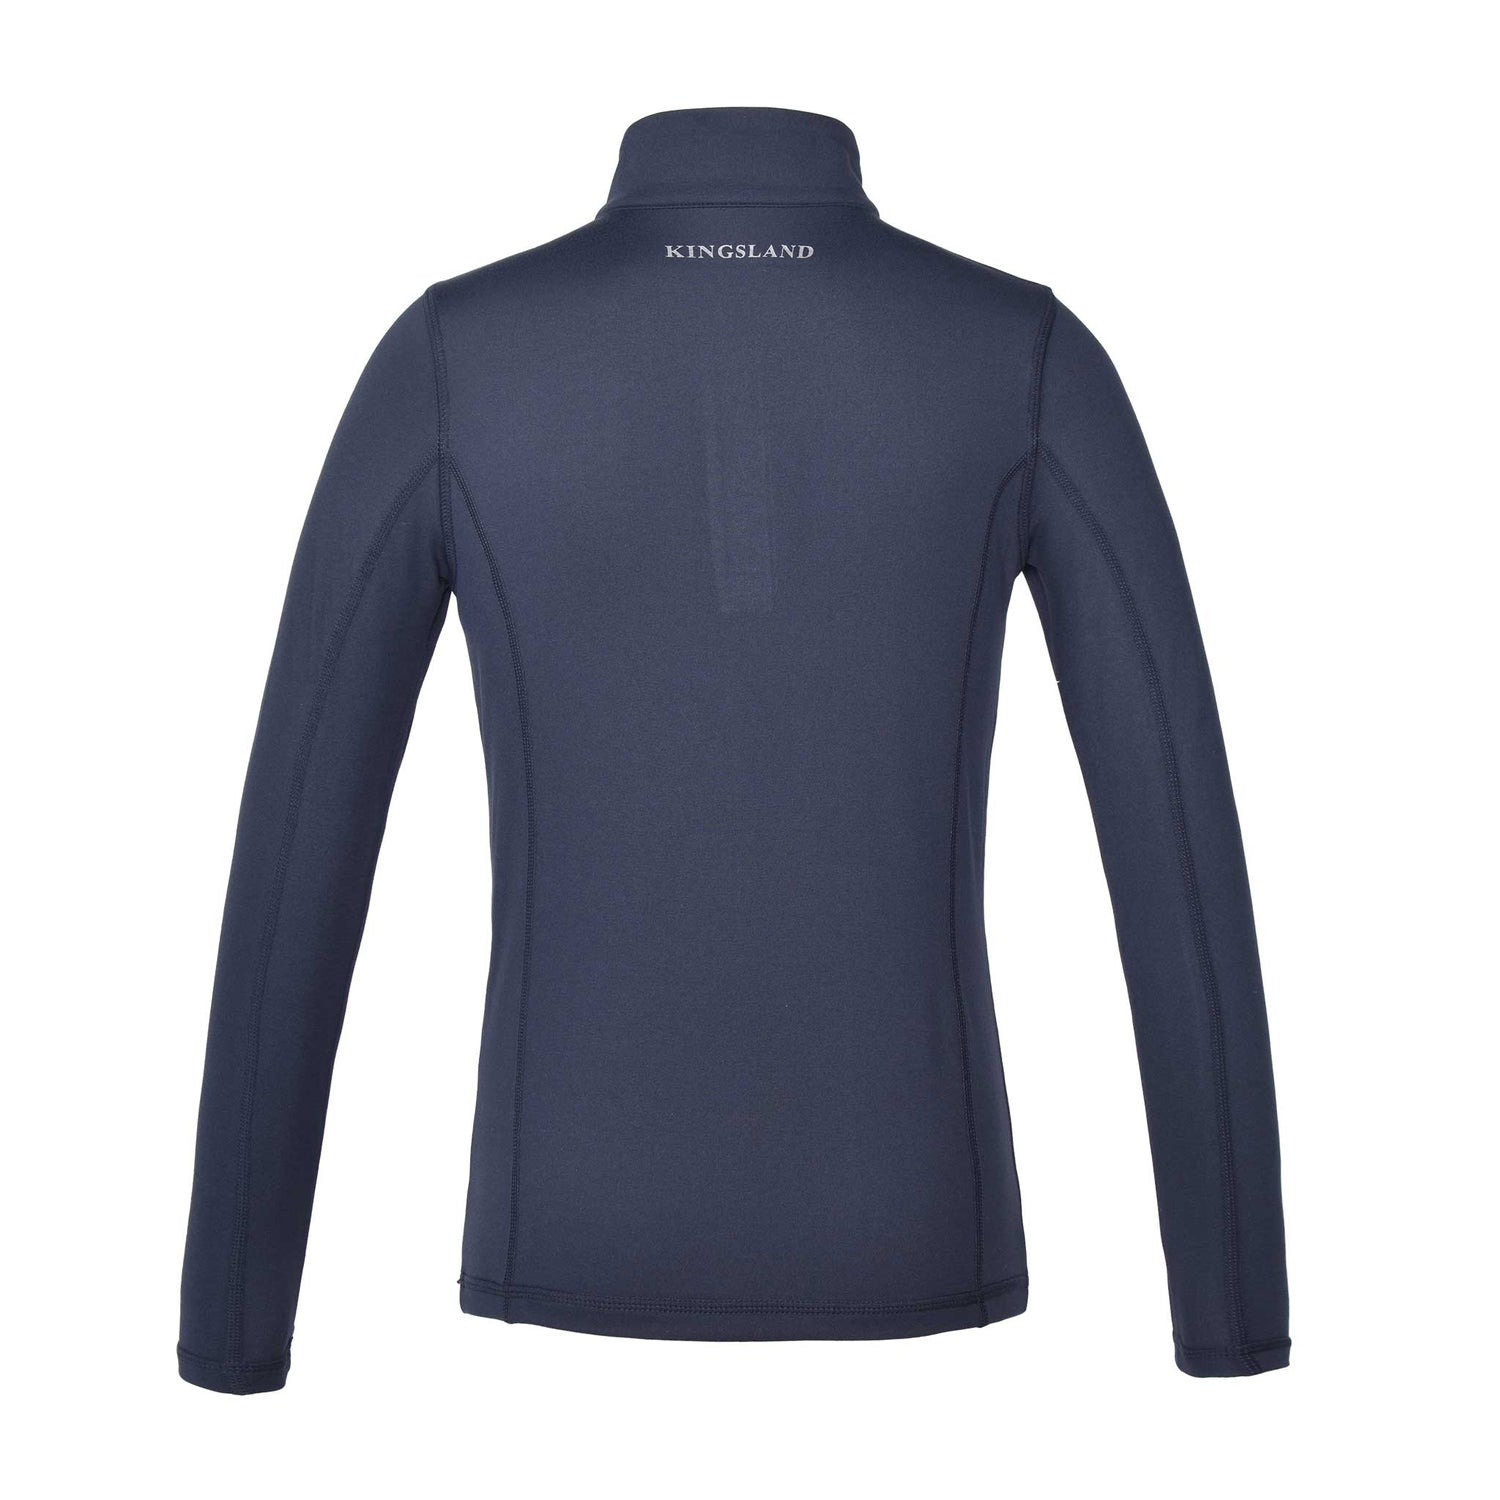 Riding Base Layer for kids